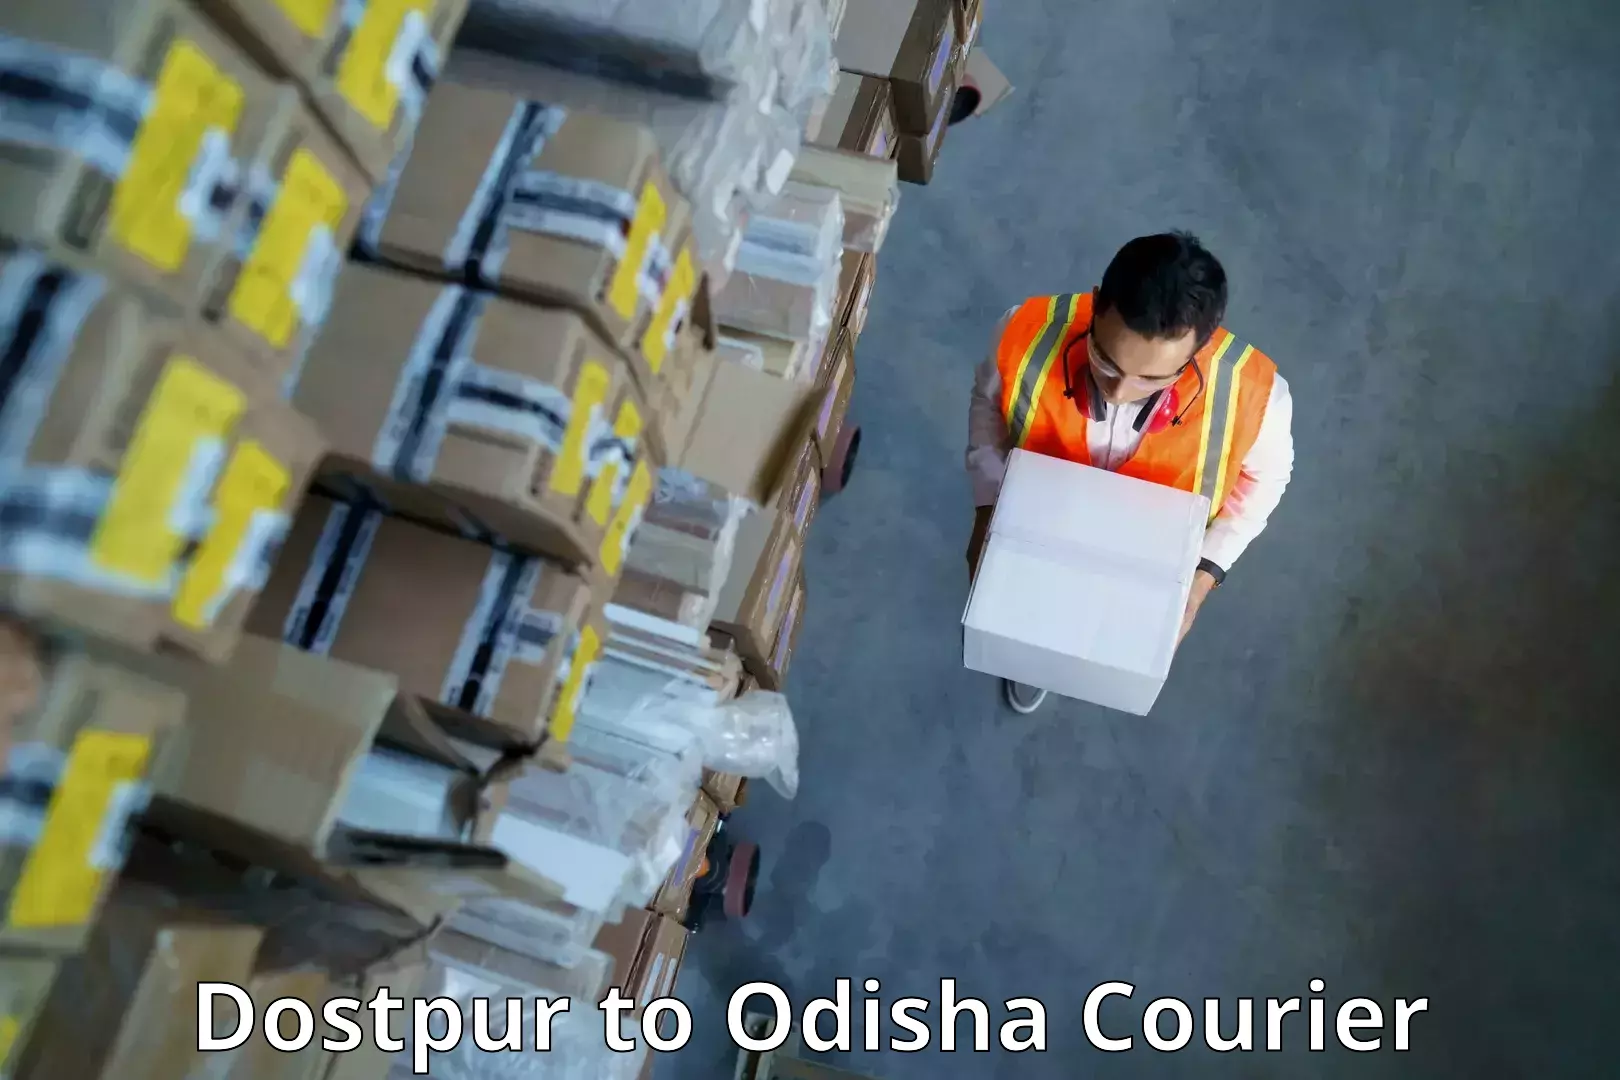 Courier service partnerships Dostpur to Jharsuguda